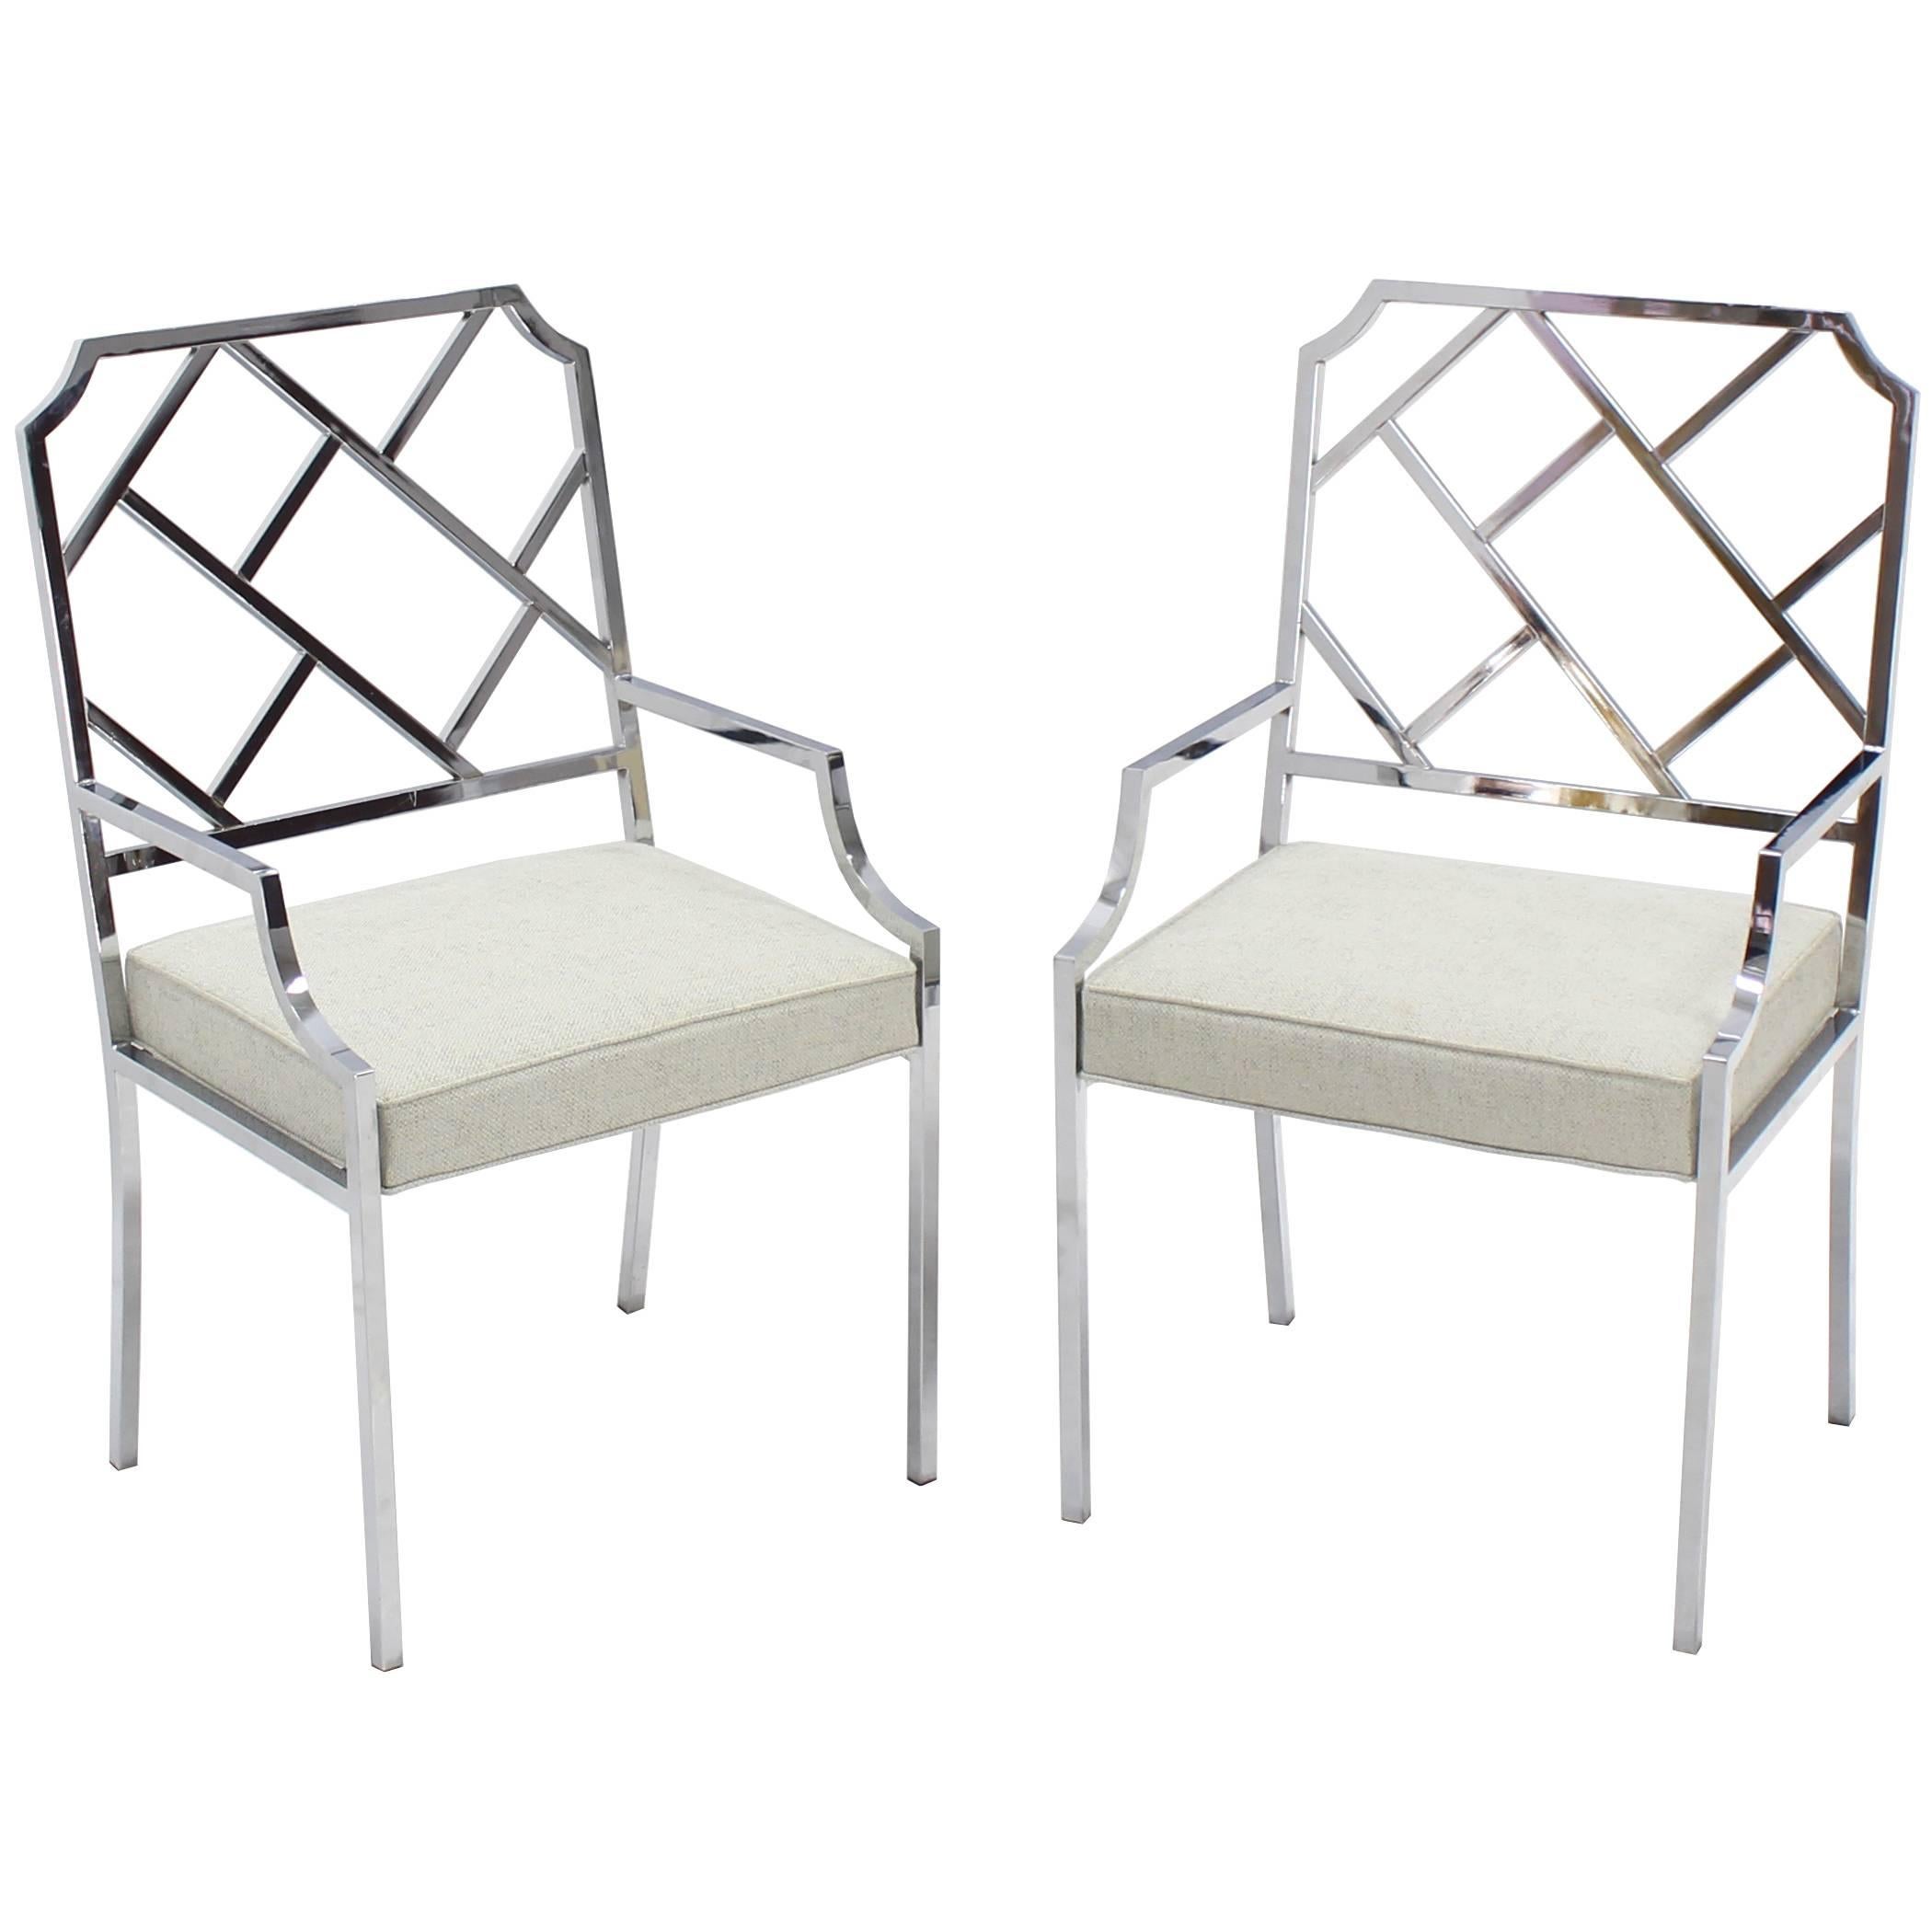 New Upholstery Pair of Chrome Wide Ladder Back Chrome Chairs For Sale